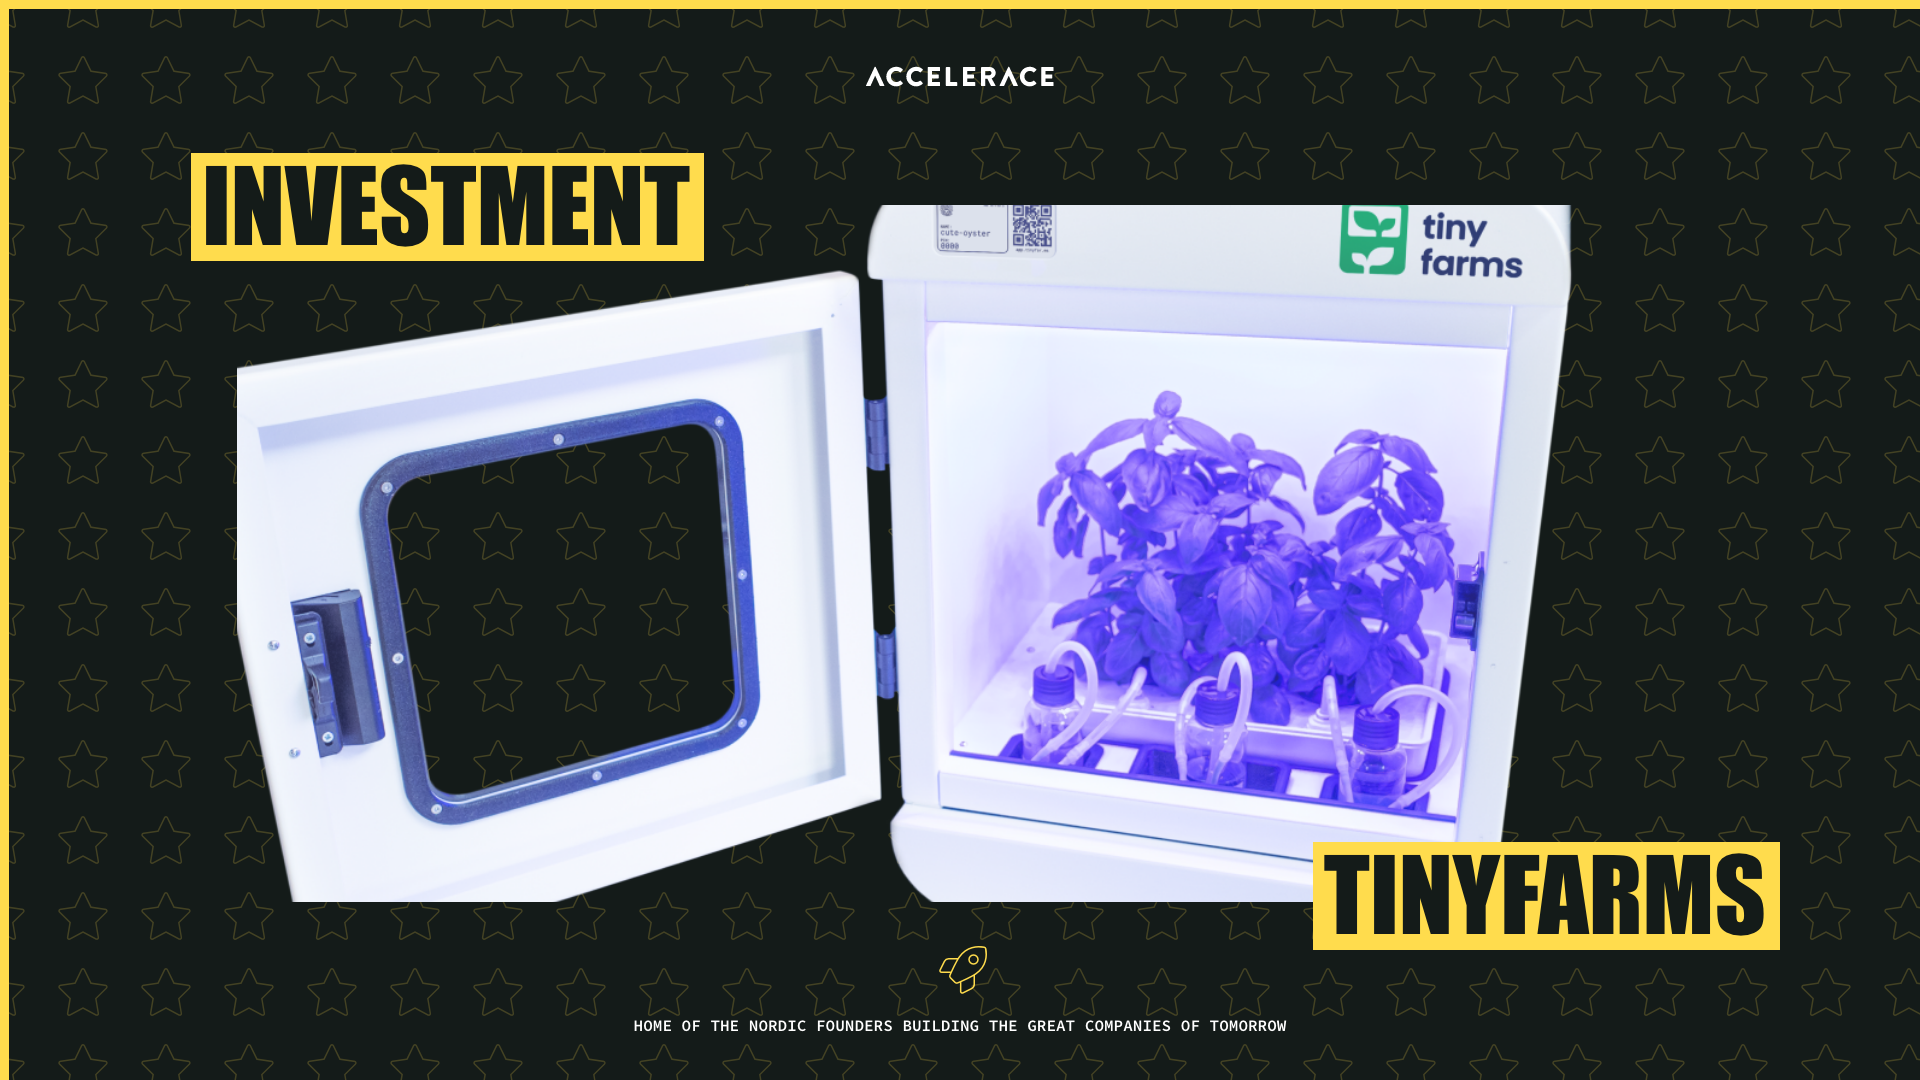 An image of the tiny farm that Accelerace has invested in along with an announcement.